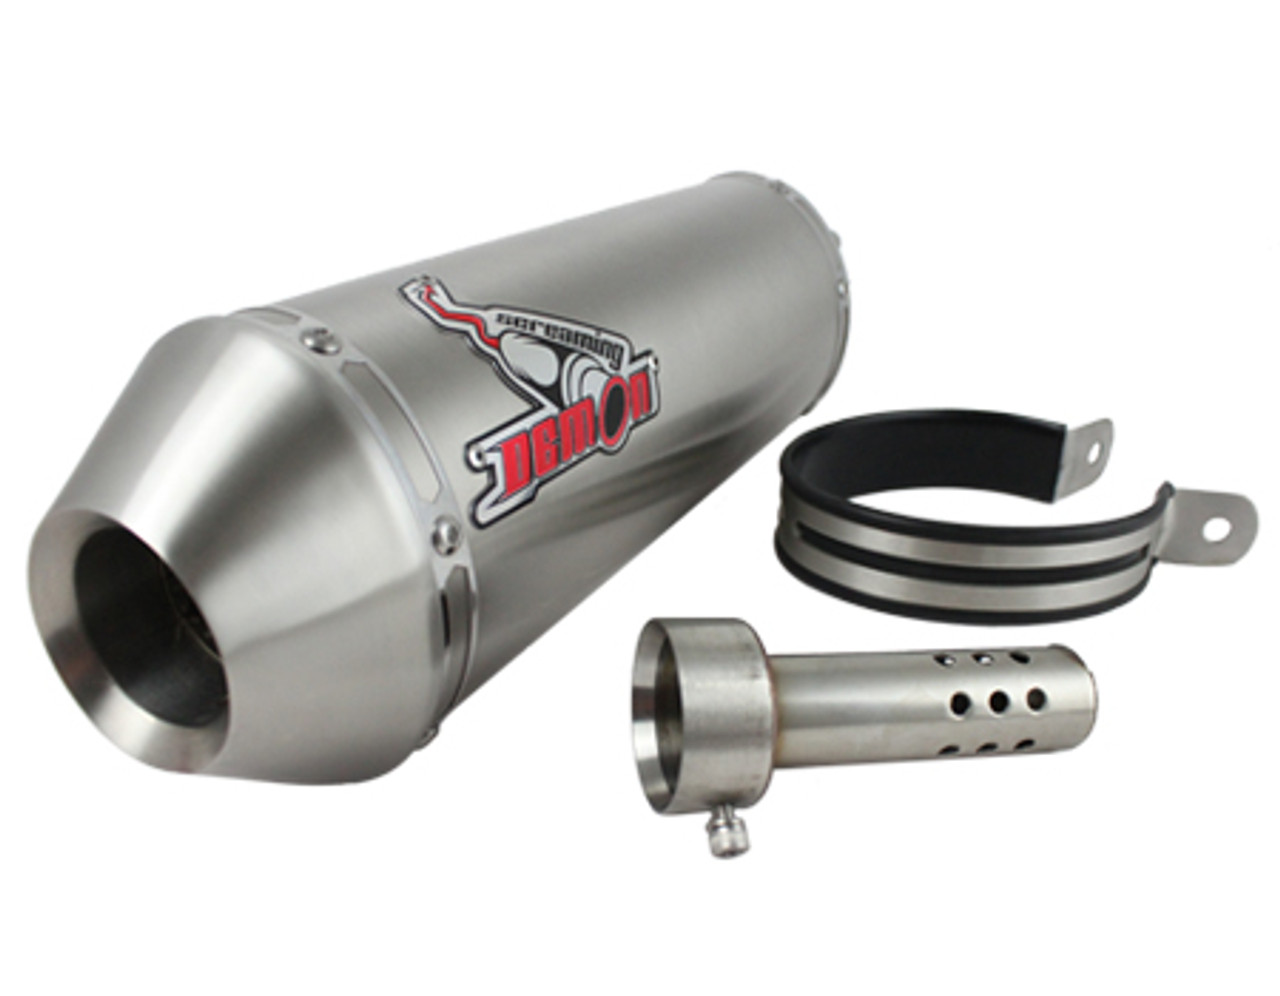 GS500F / GS500E 2004-2011 Screaming Demon S/S S/O Oval Exhaust